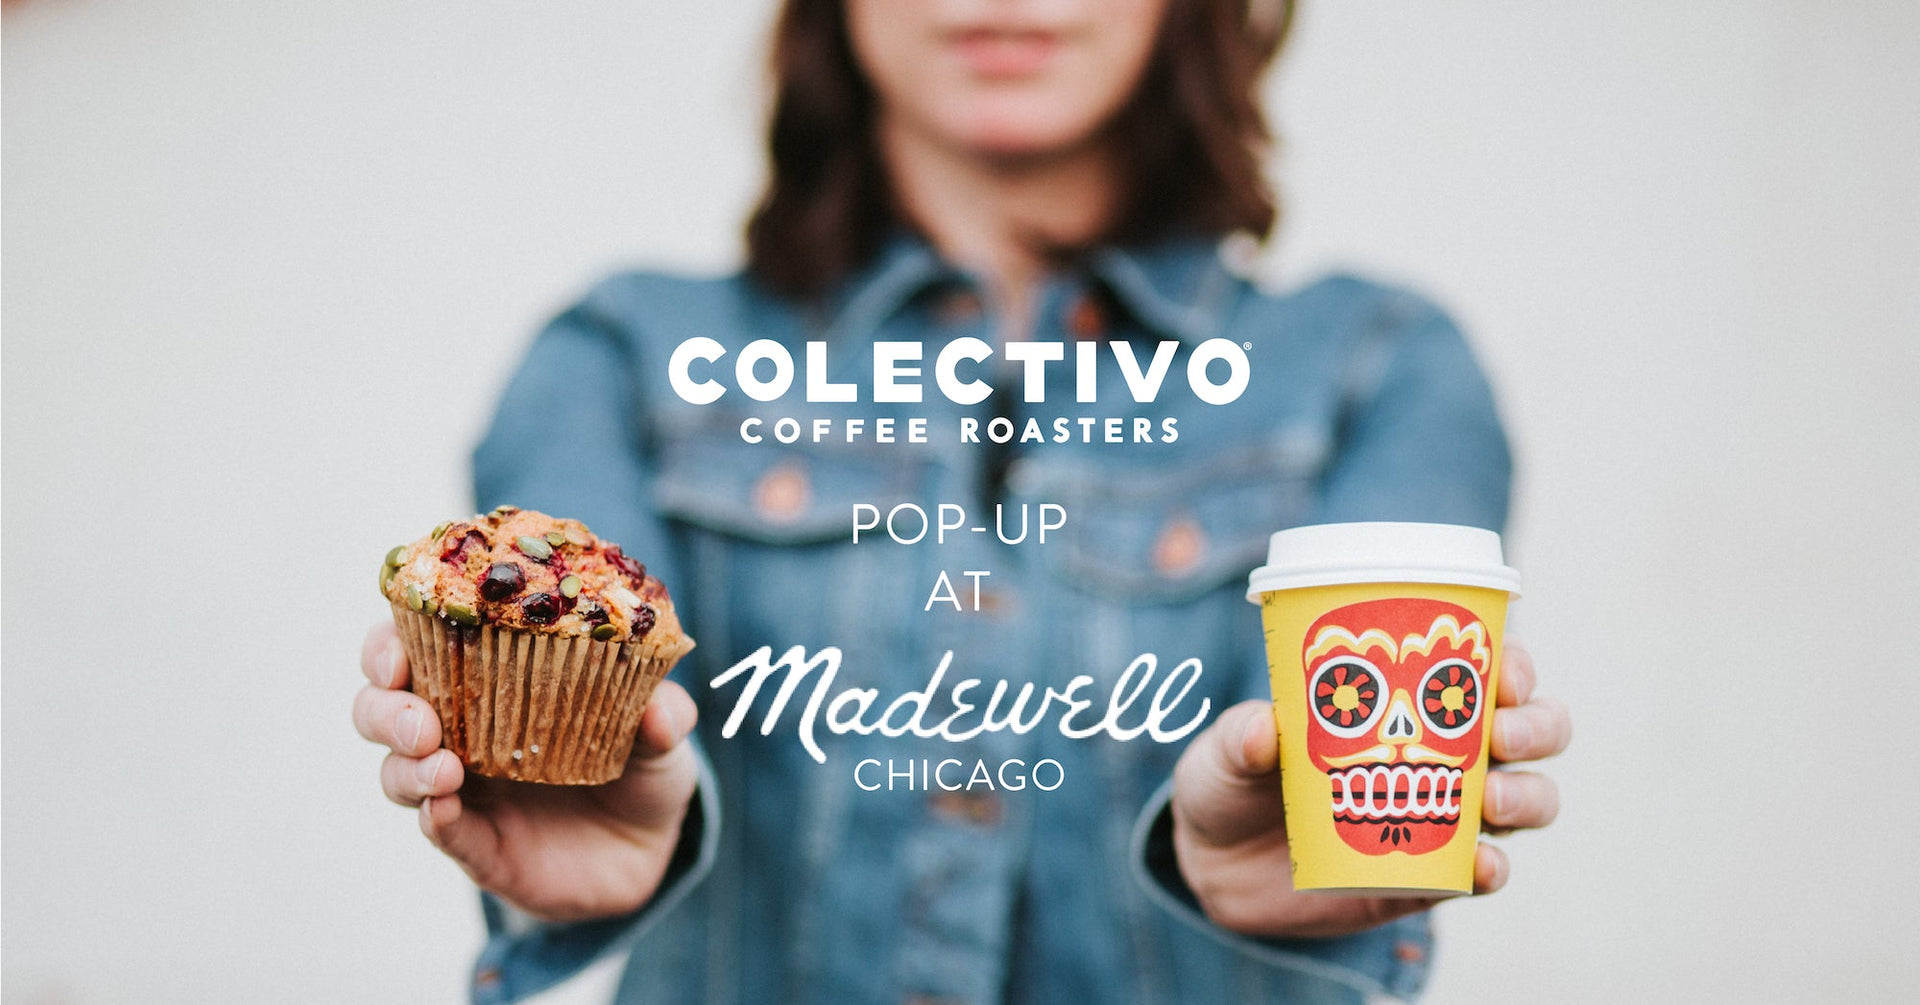 Colectivo Pop Up @ Madewell Chicago